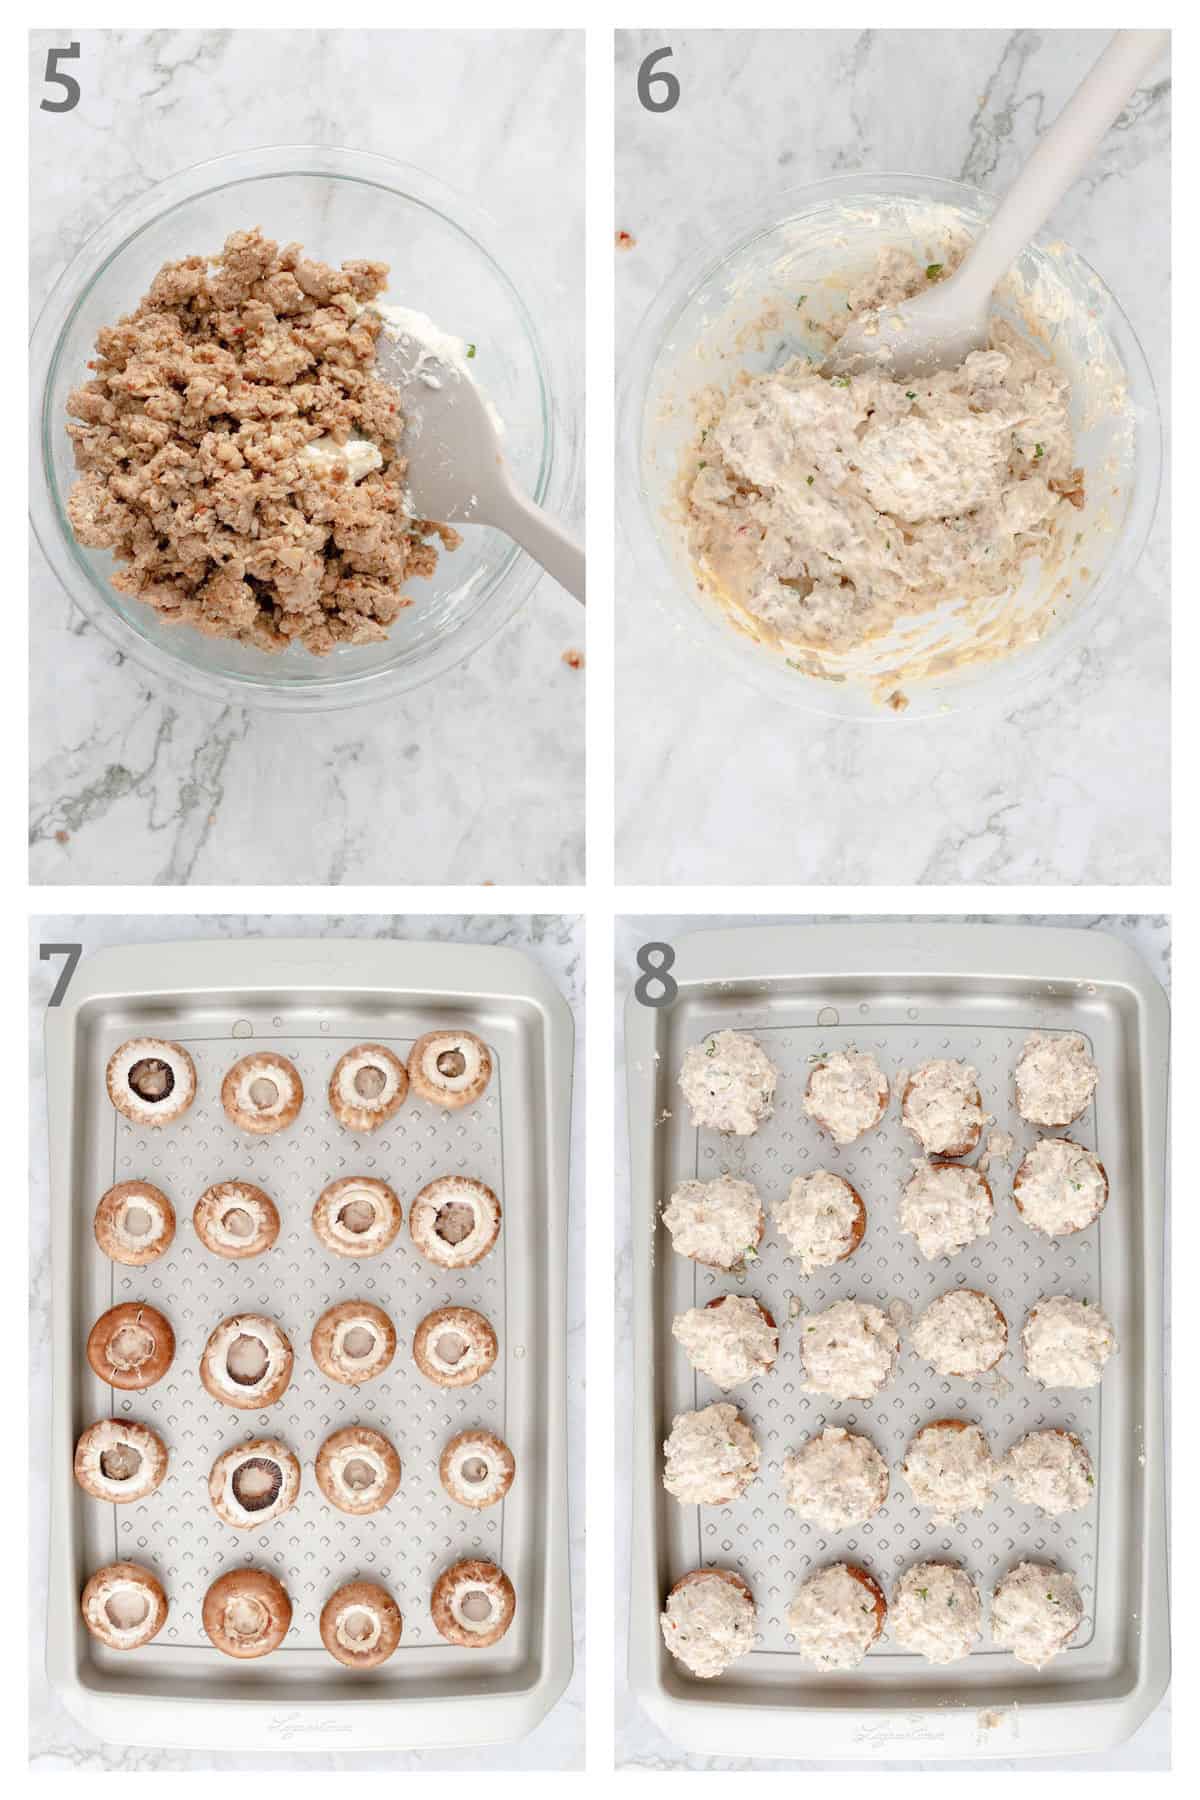 Step by Step Instructions for making Keto Sausage Stuffed Mushroom